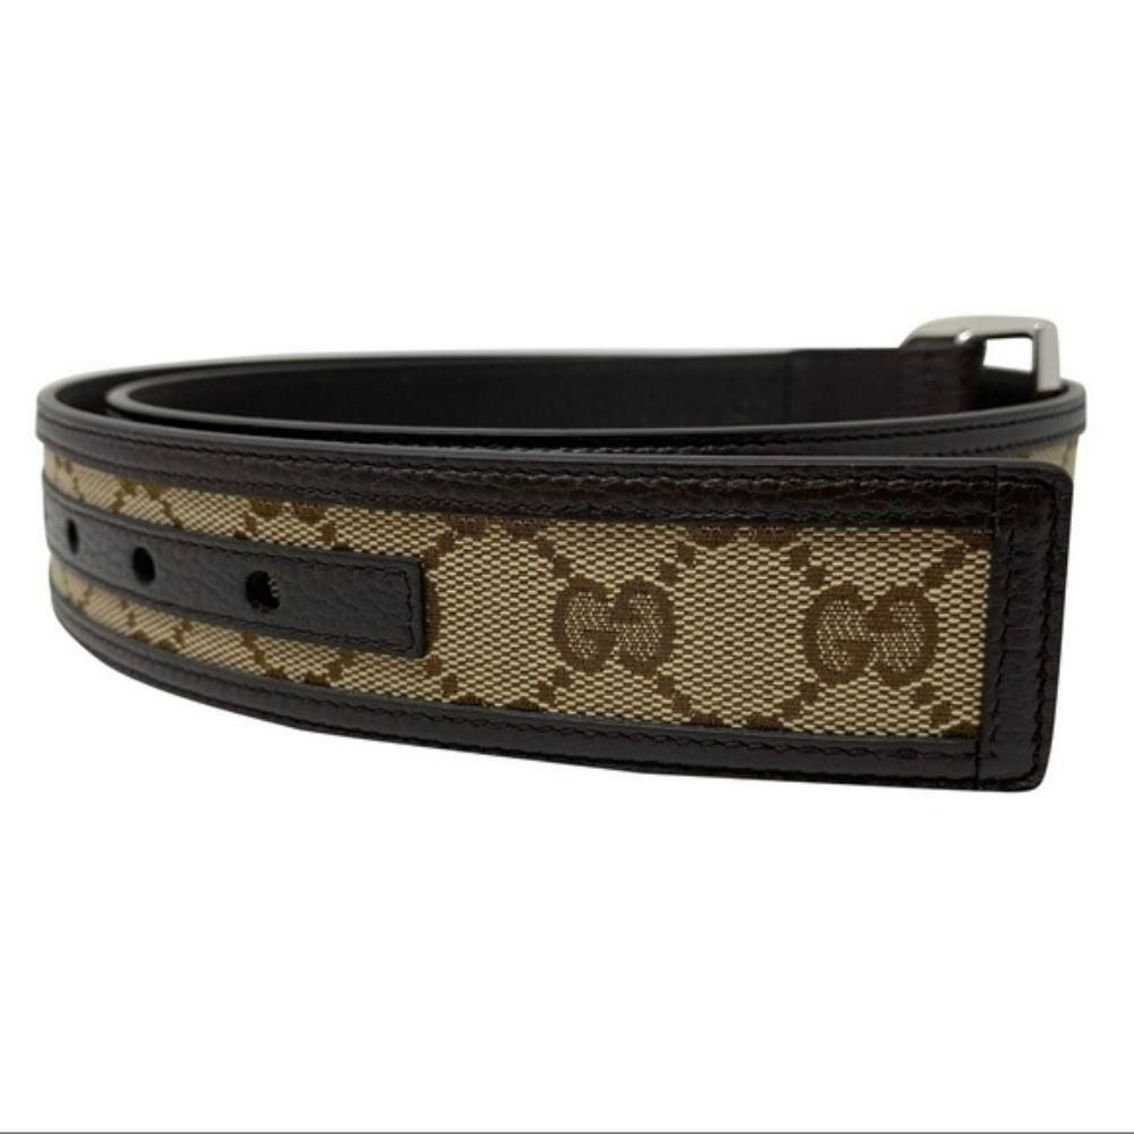 Gucci GG Brown and Beige Canvas Leather Trim Belt Size 36/90 - Image 2 of 5